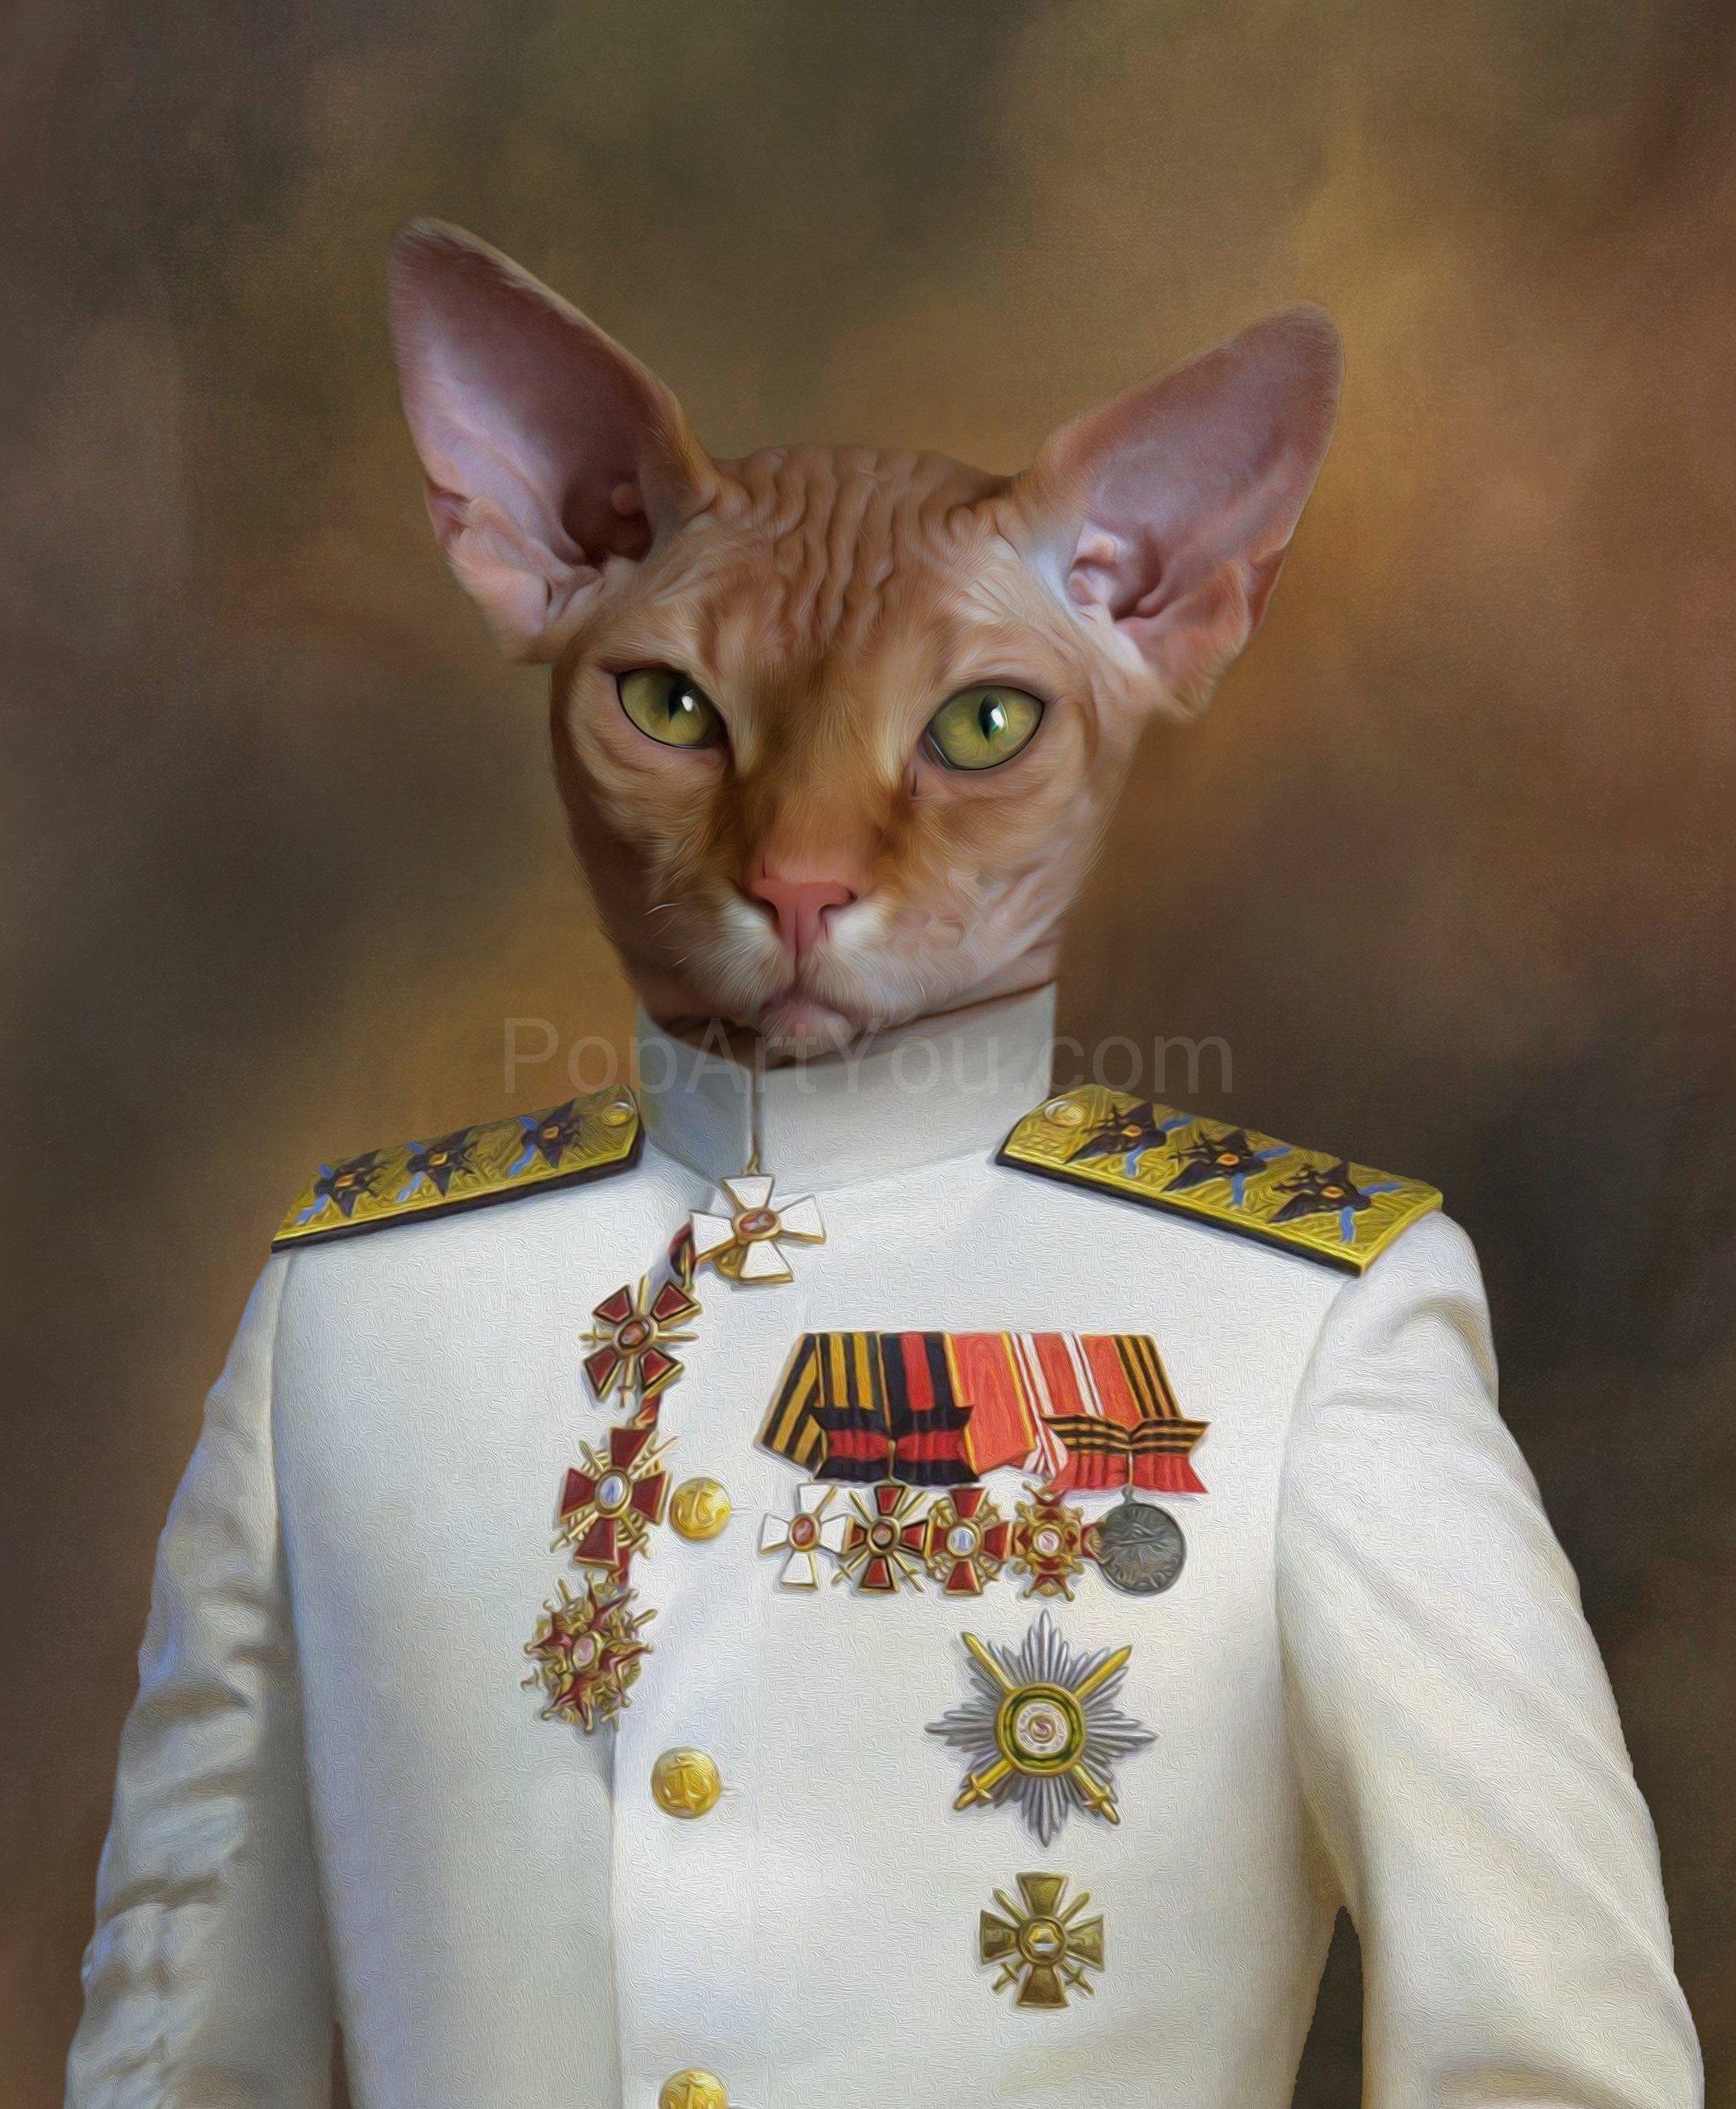 The portrait shows a cat with a human body, dressed in white soldier clothes with medals